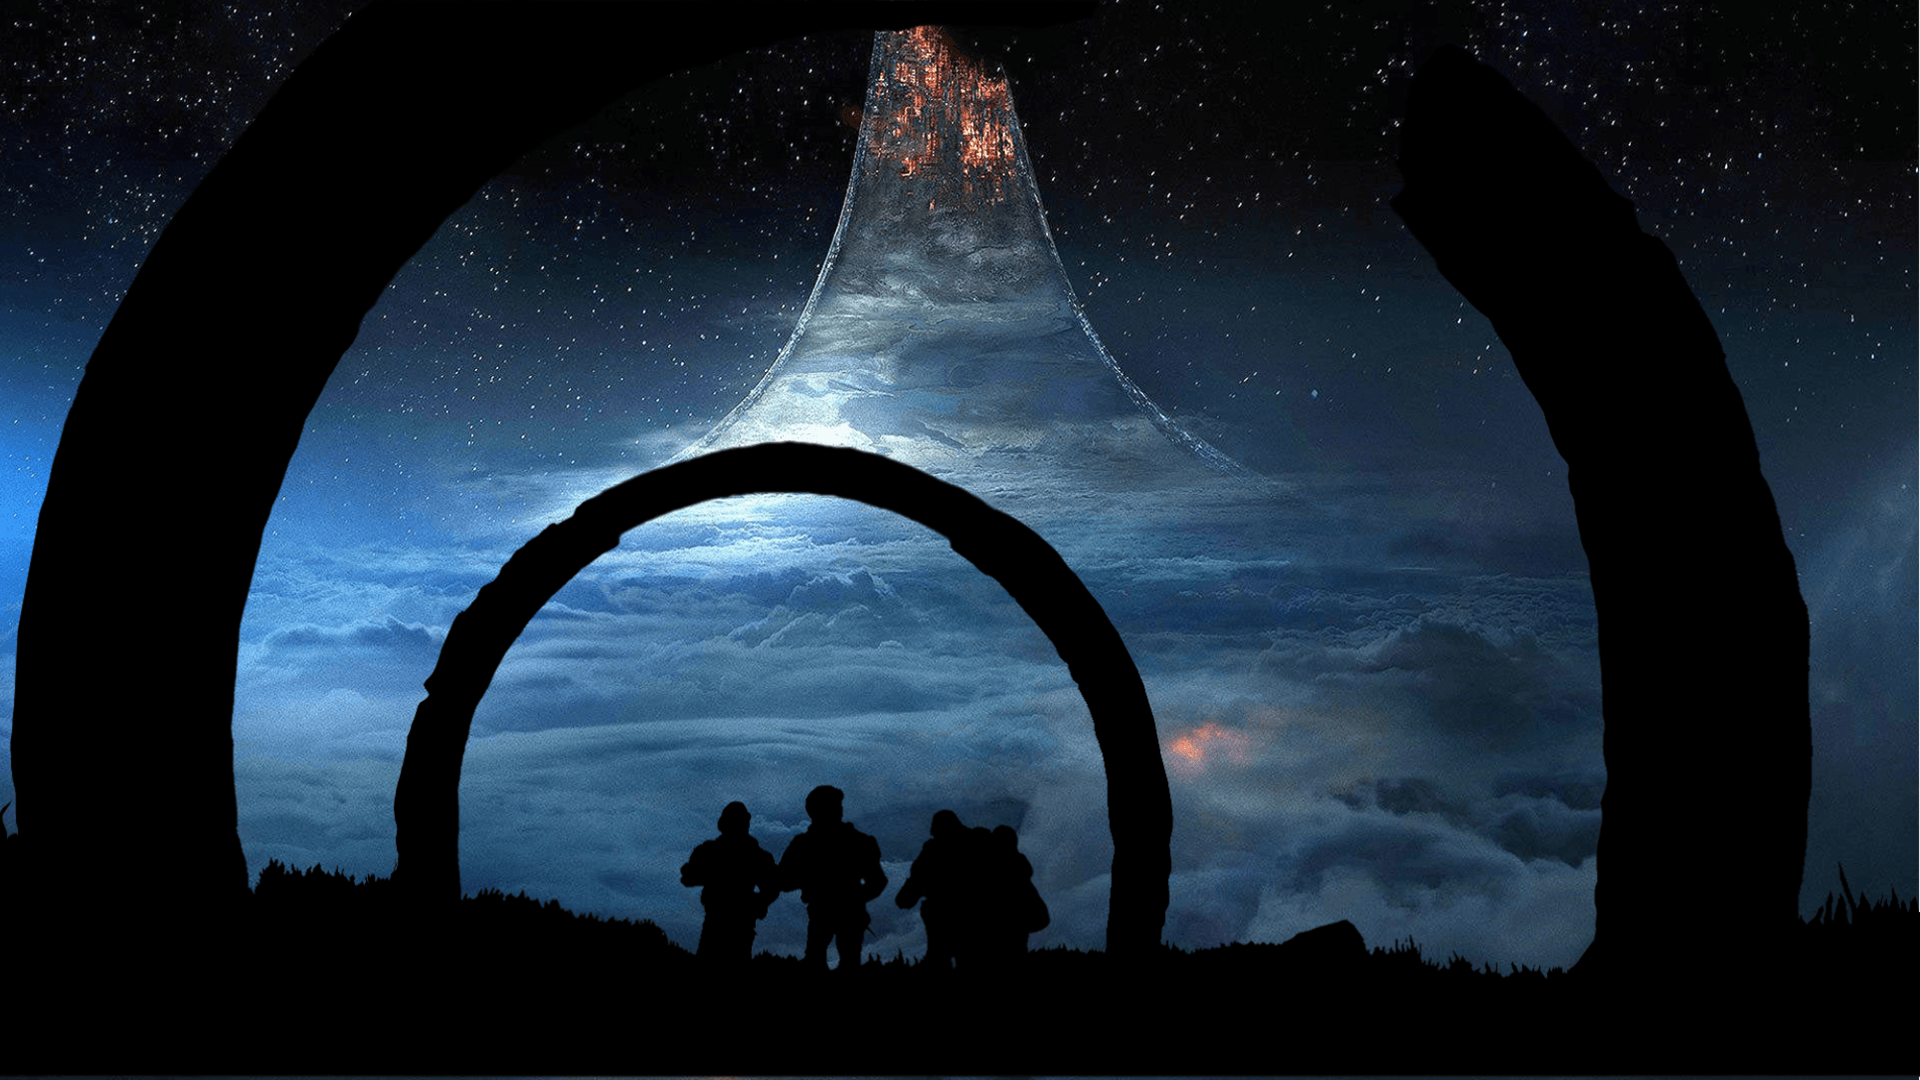 Halo Infinite Marines Wallpapers that I Created, link in comments